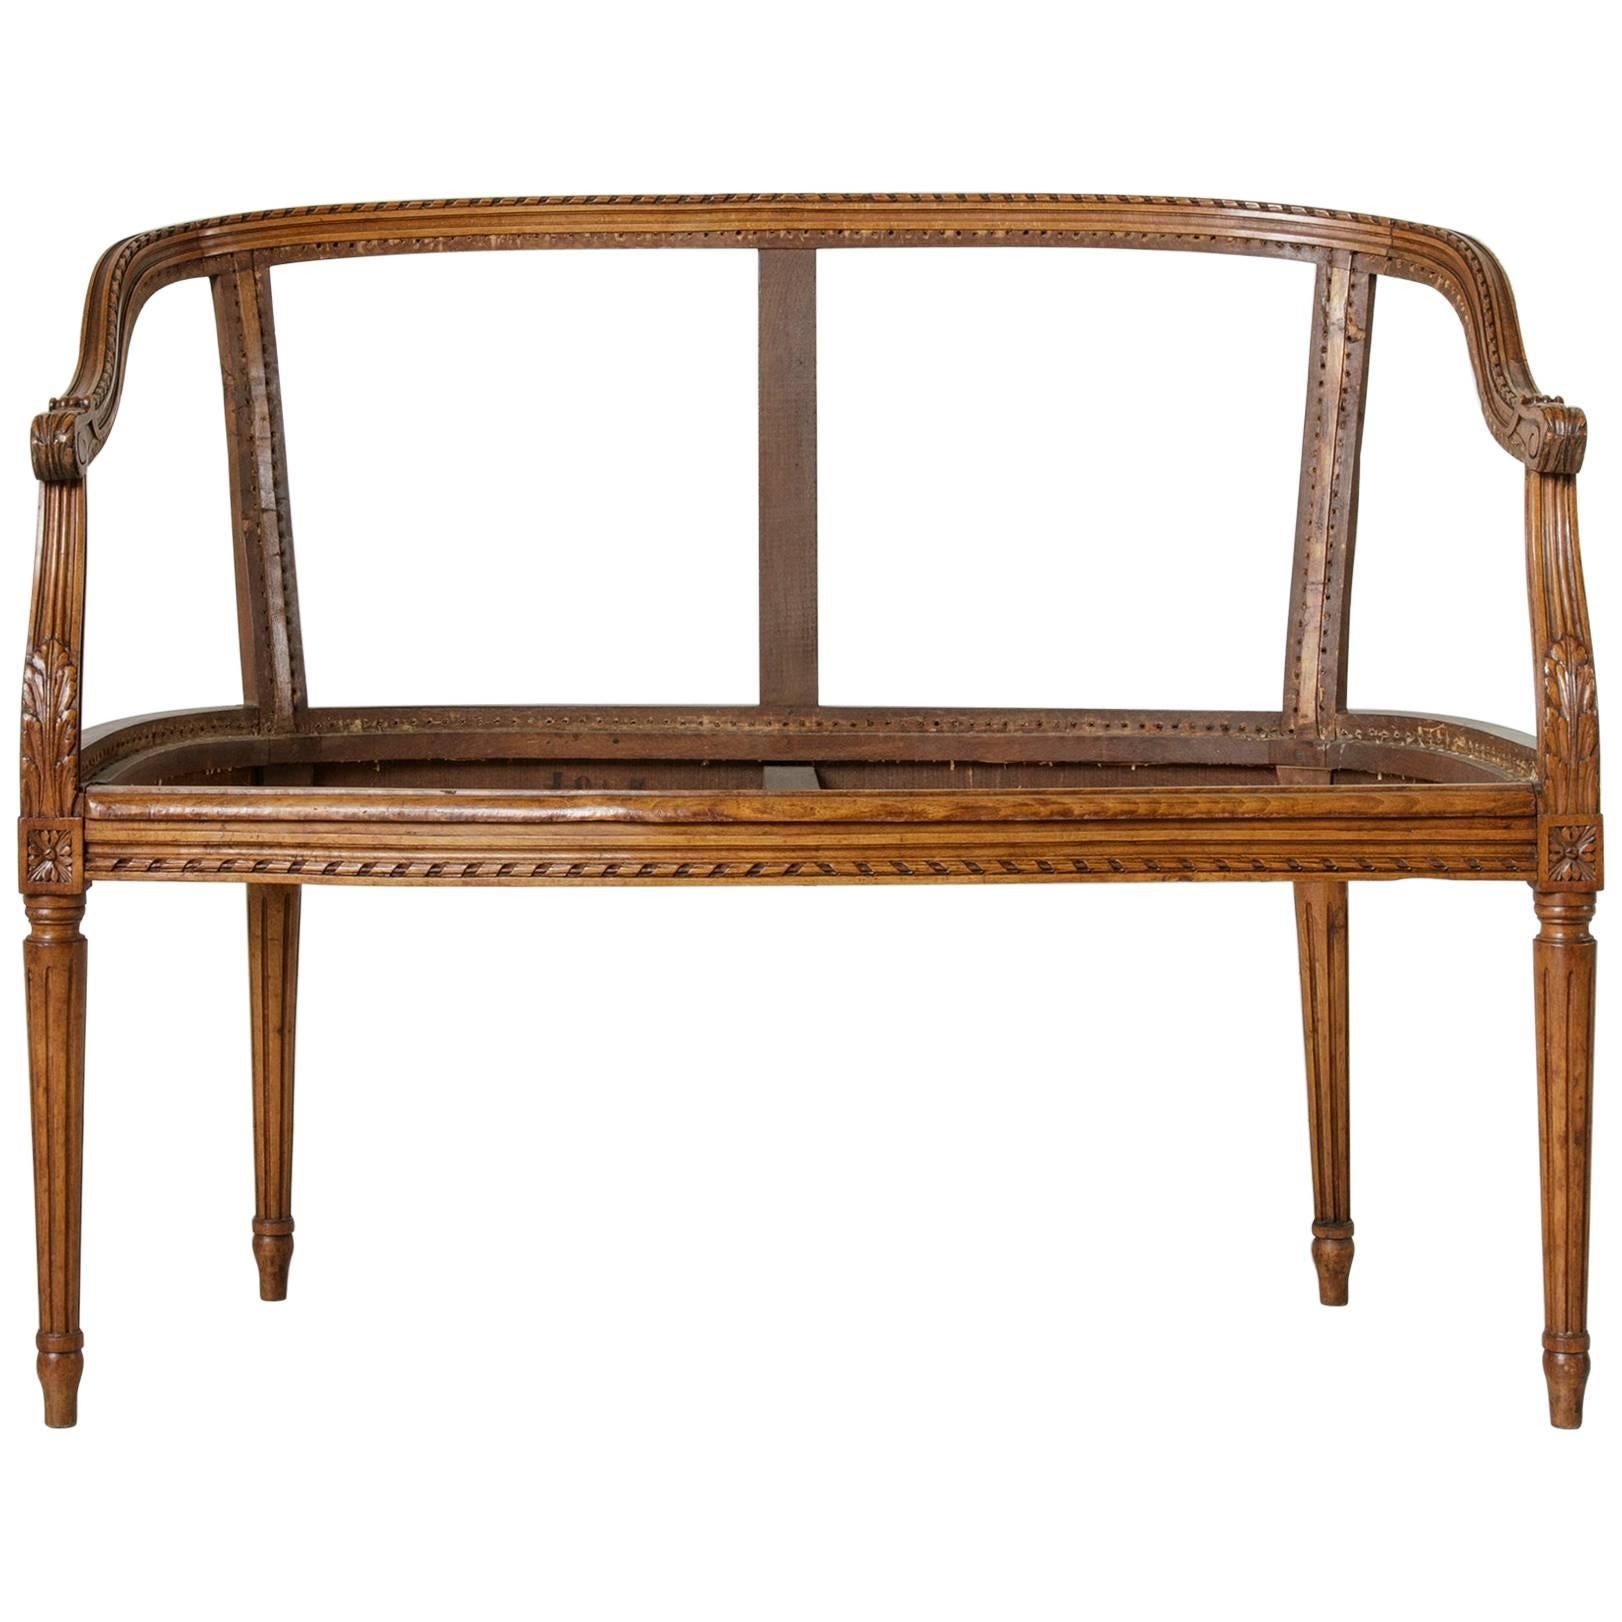 Late 19th Century French Louis XVI Style Hand-Carved Walnut Settee, Bench Frame